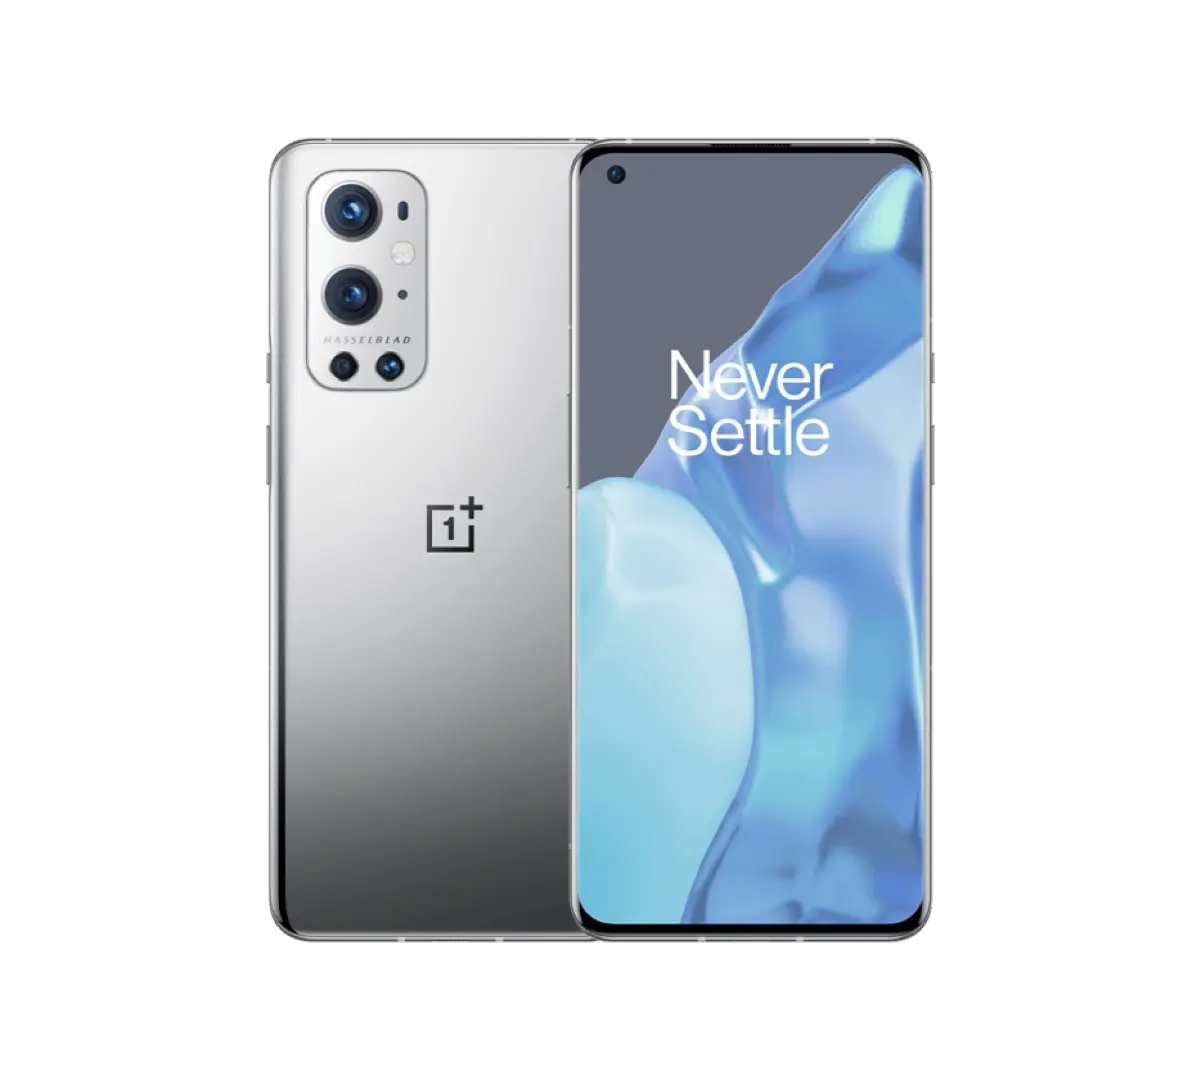 256GB OnePlus 9 Pro 5G Unlocked Smartphone for T-Mobile + OnePlus 9 Bumper Case